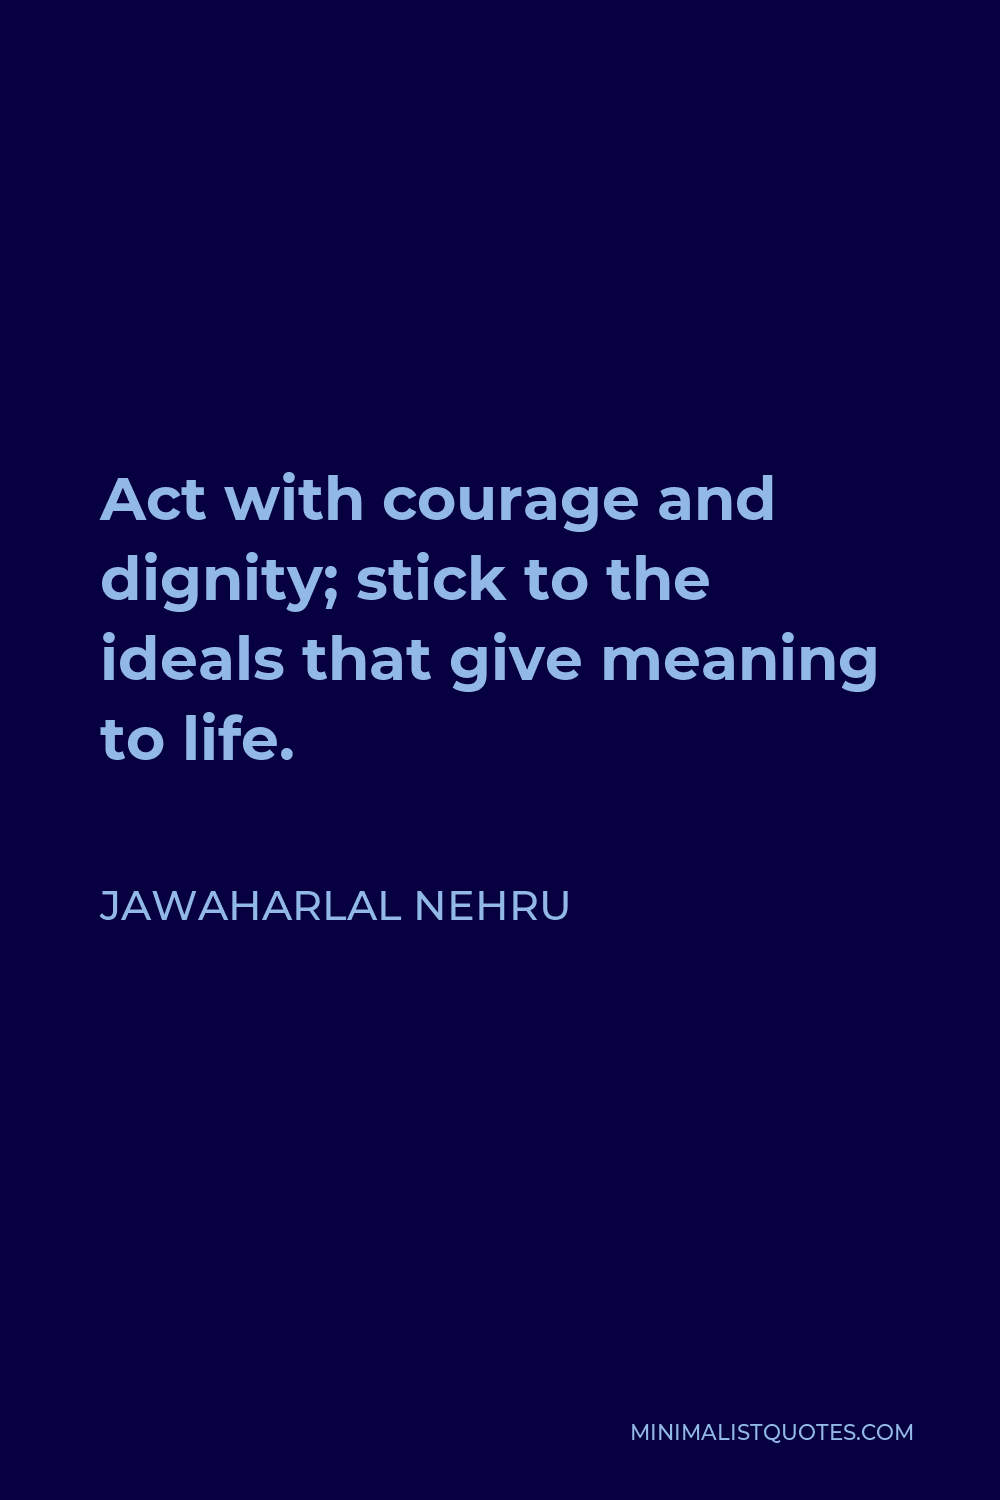 Jawaharlal Nehru Quote - Act with courage and dignity; stick to the ideals that give meaning to life.